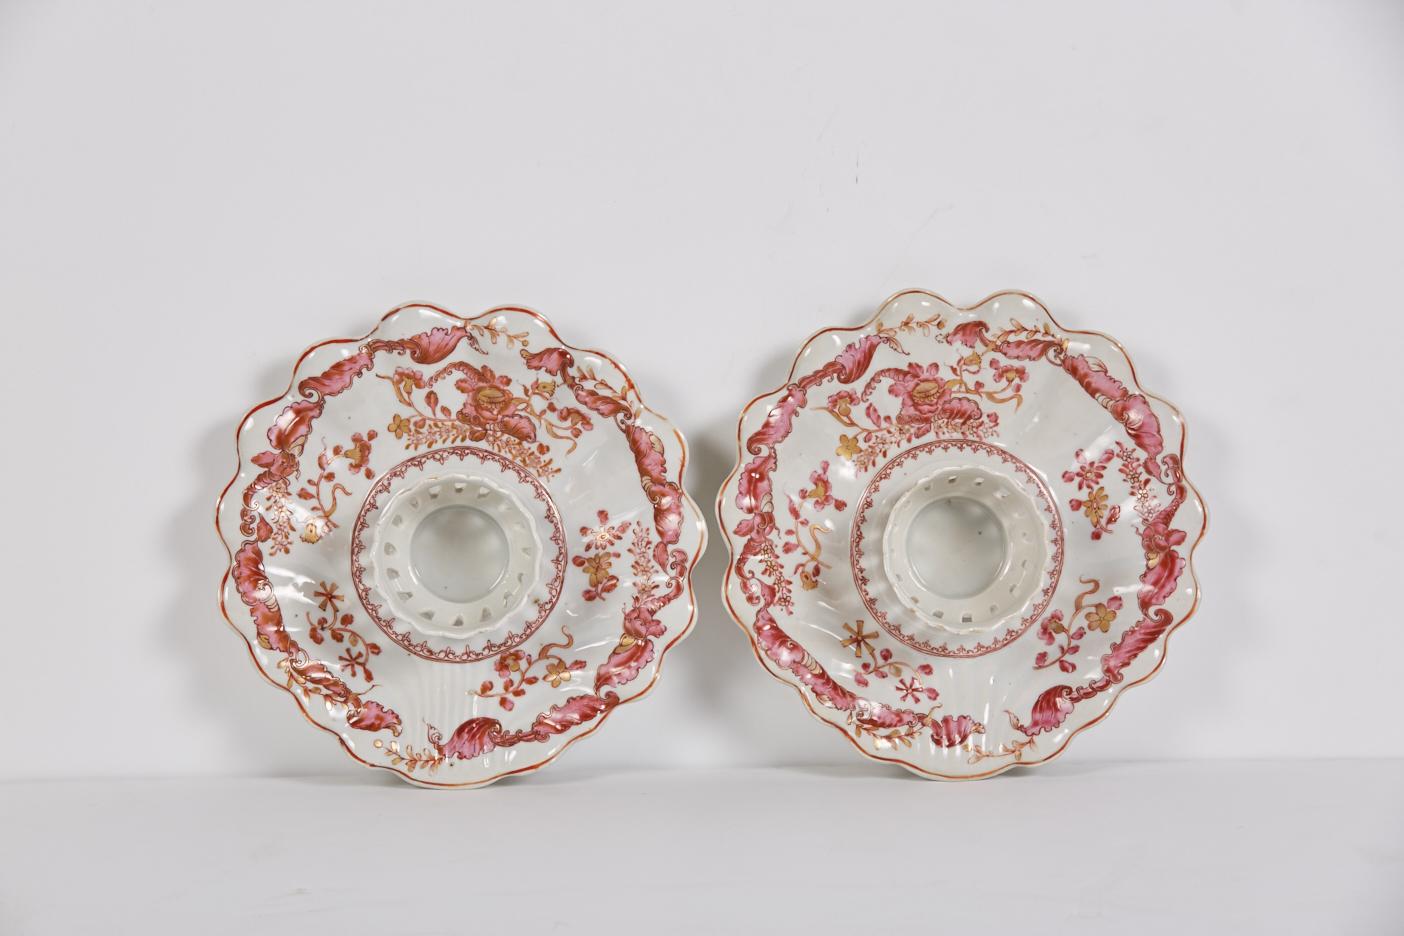 A pair of Chinese export porcelain mancerinas or trembleuses likely made for the Spanish/Spanish Colonial market. Based on a silver form, the standing central ring was designed to support and steady a cup and originally used for serving chocolate.